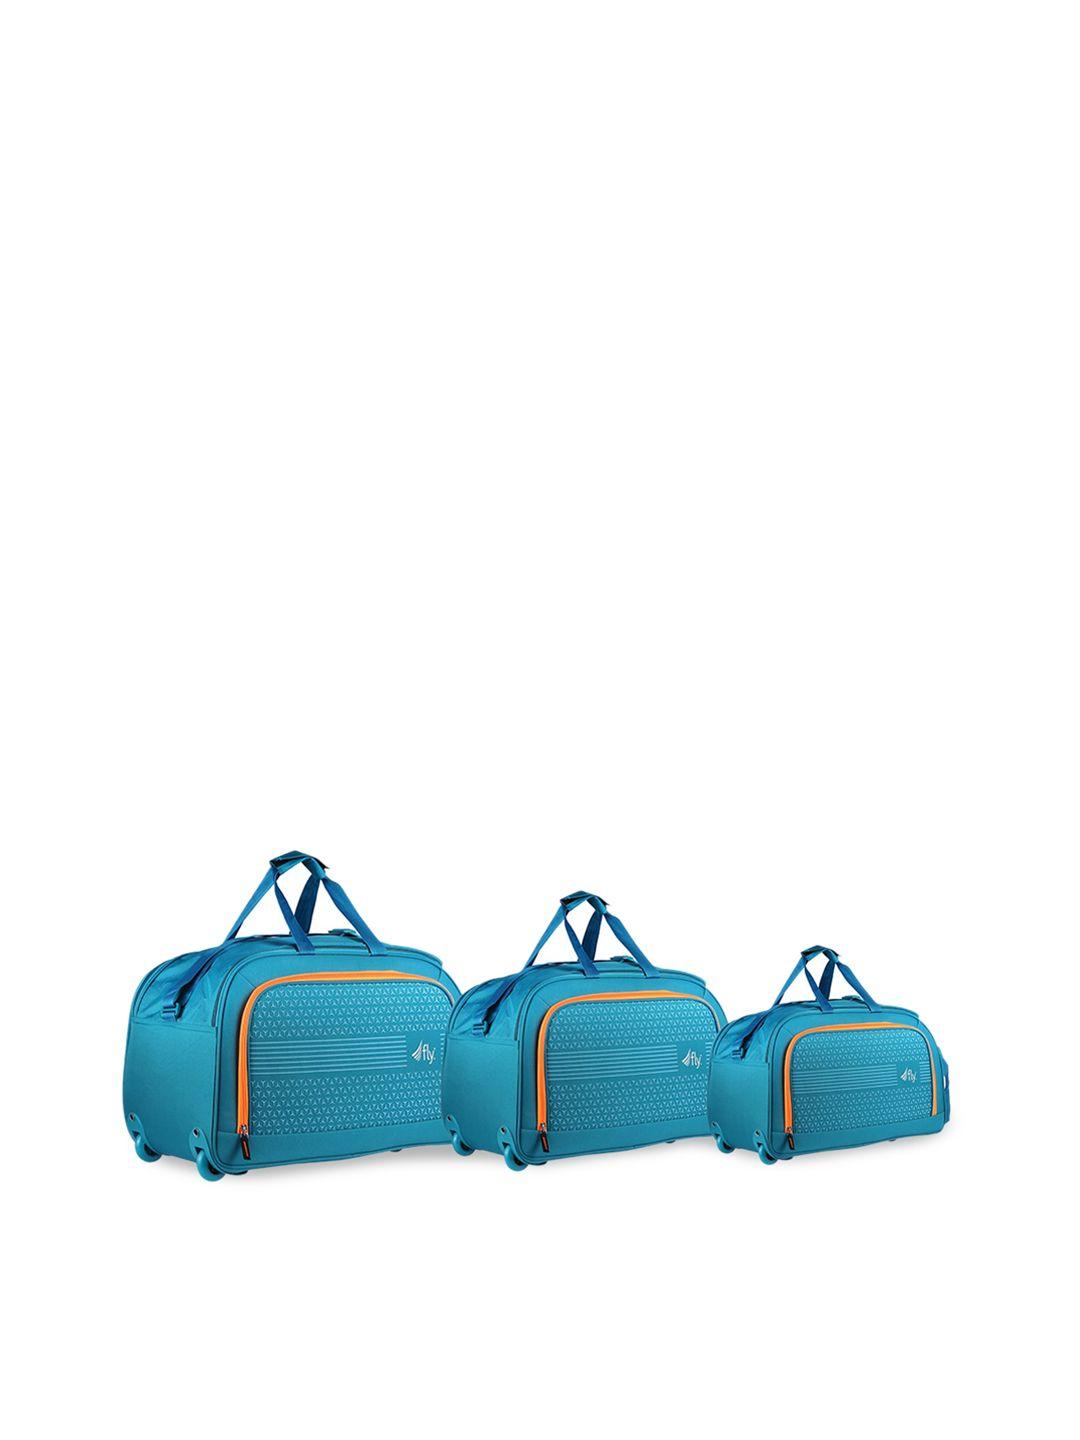 fly set of 3 travel duffel bags